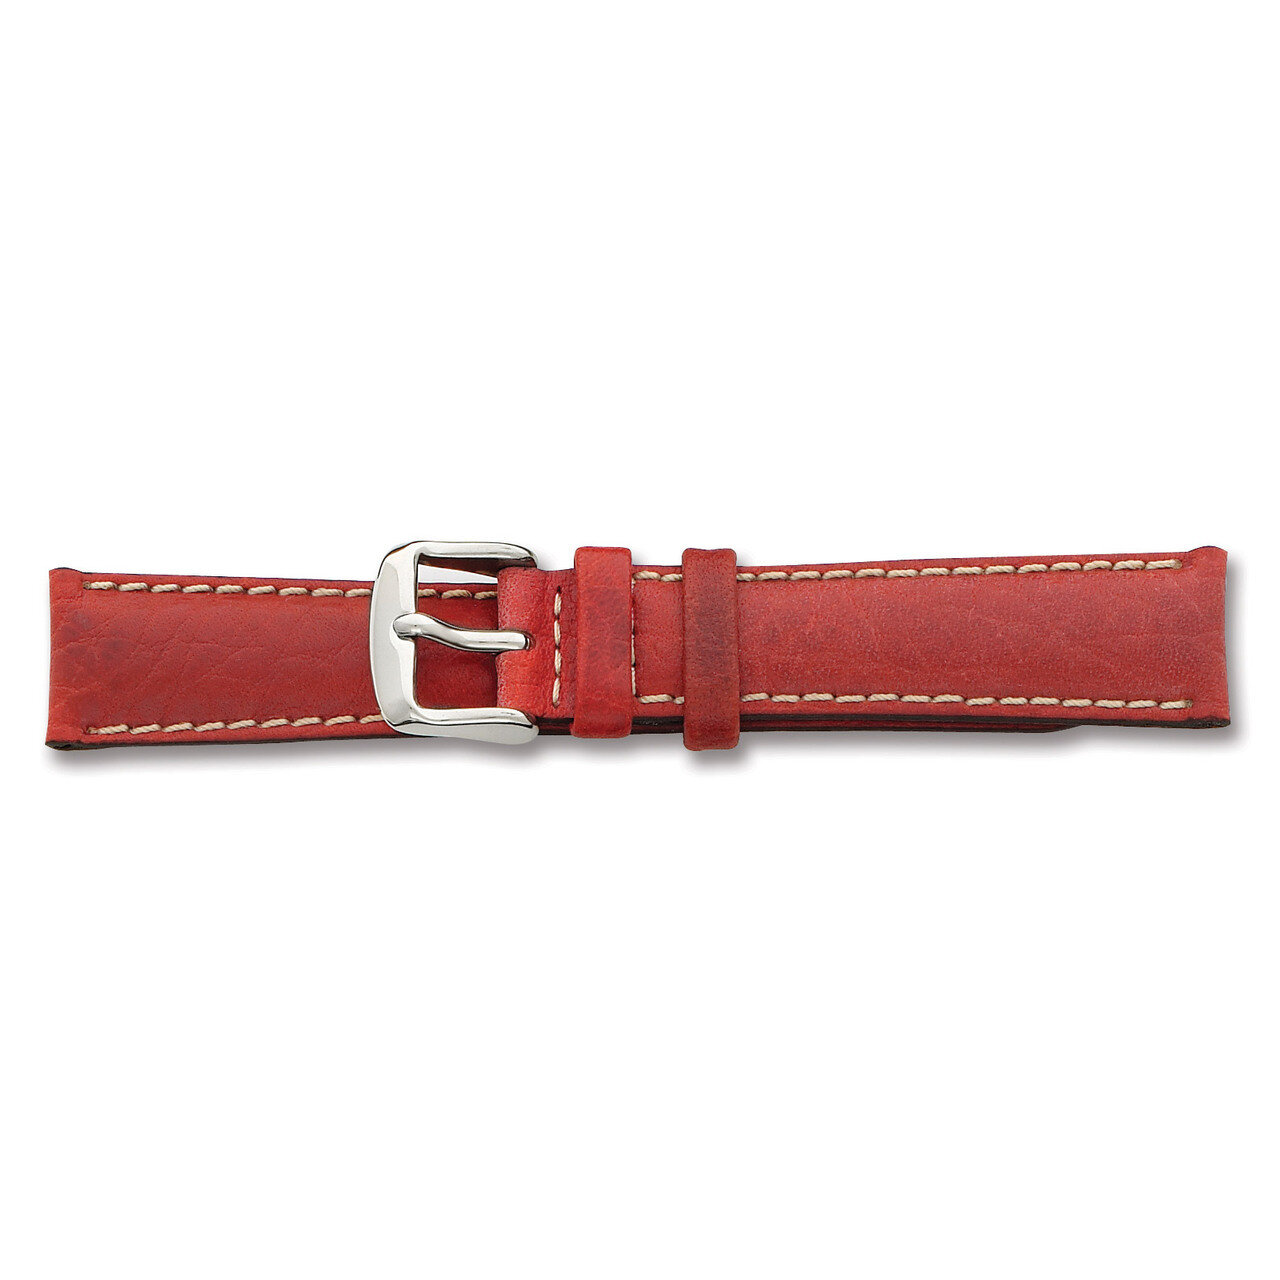 24mm Red Sport Leather White Stitch Watch Band 7.5 Inch Silver-tone Buckle BA138-24